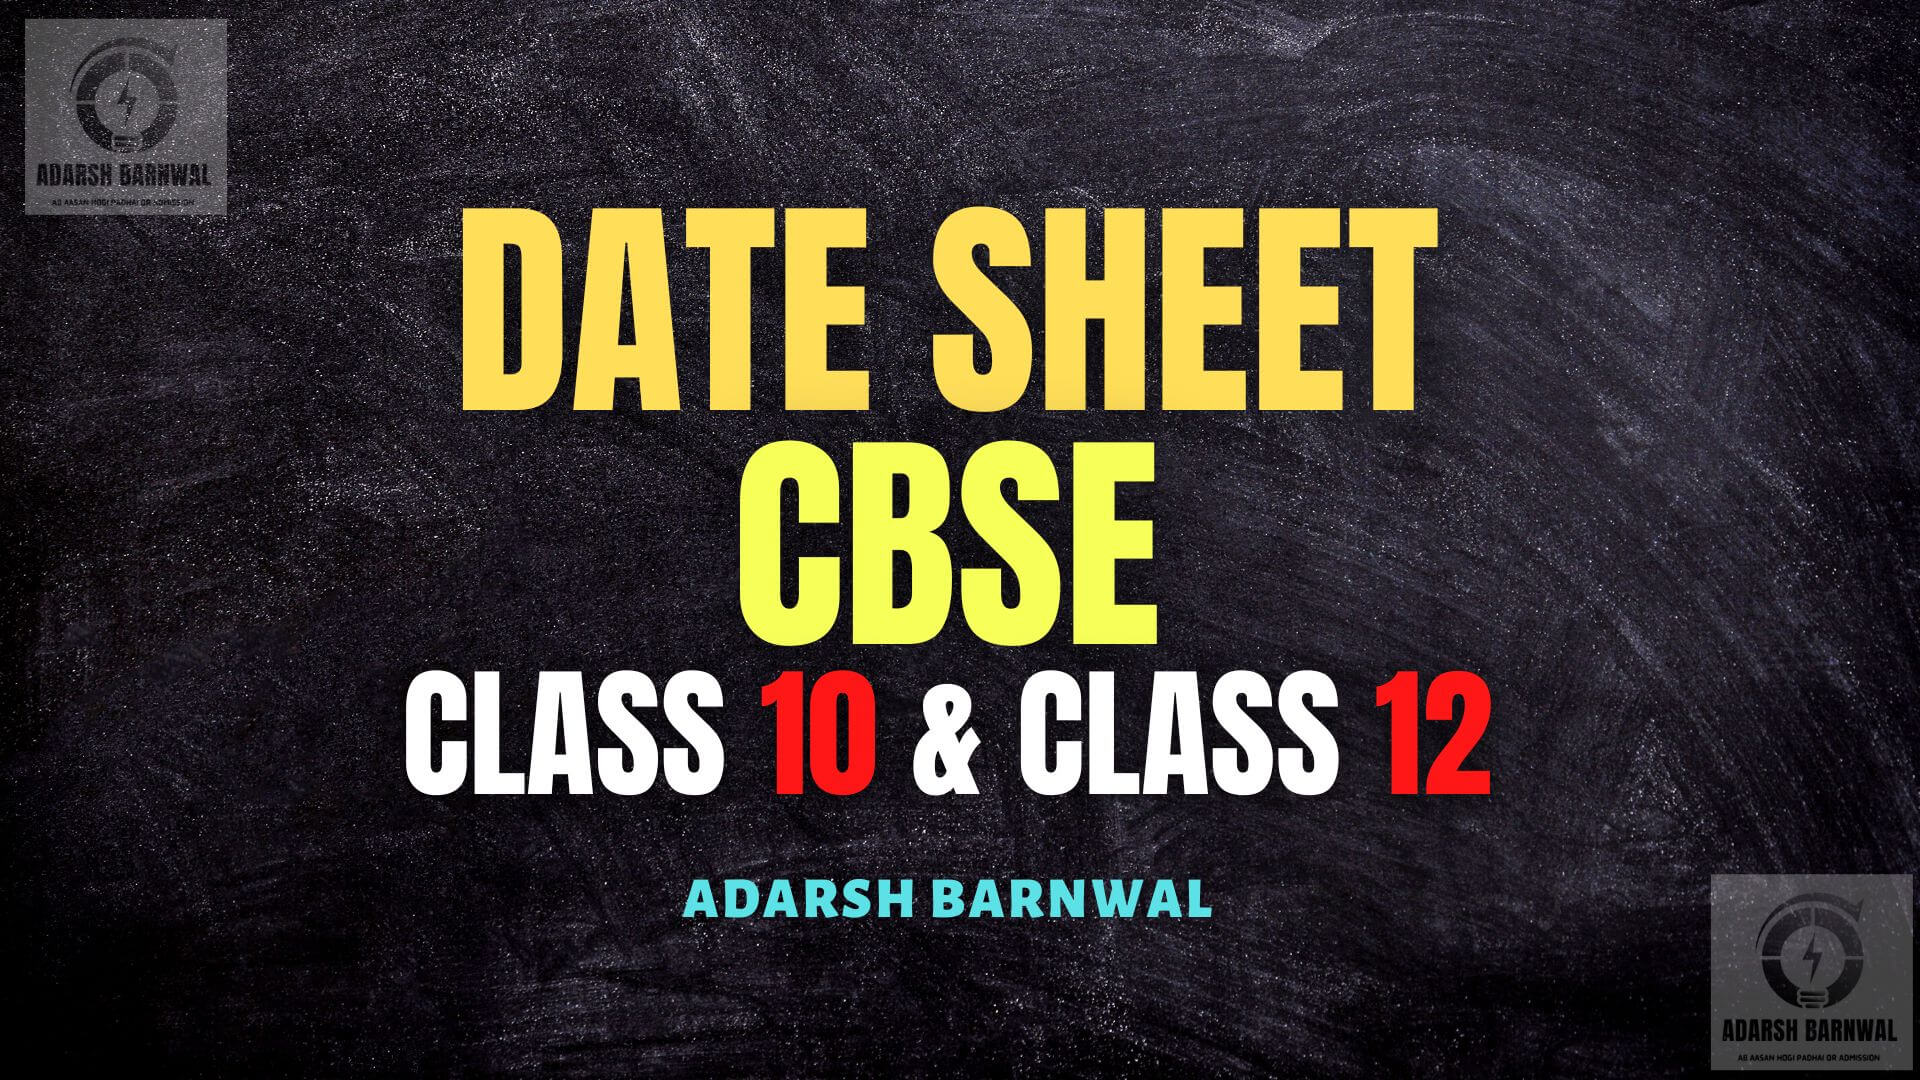 Cbse Date Sheet 2023 Revised Class 10 & Class 12 pdf by adarsh barnwal